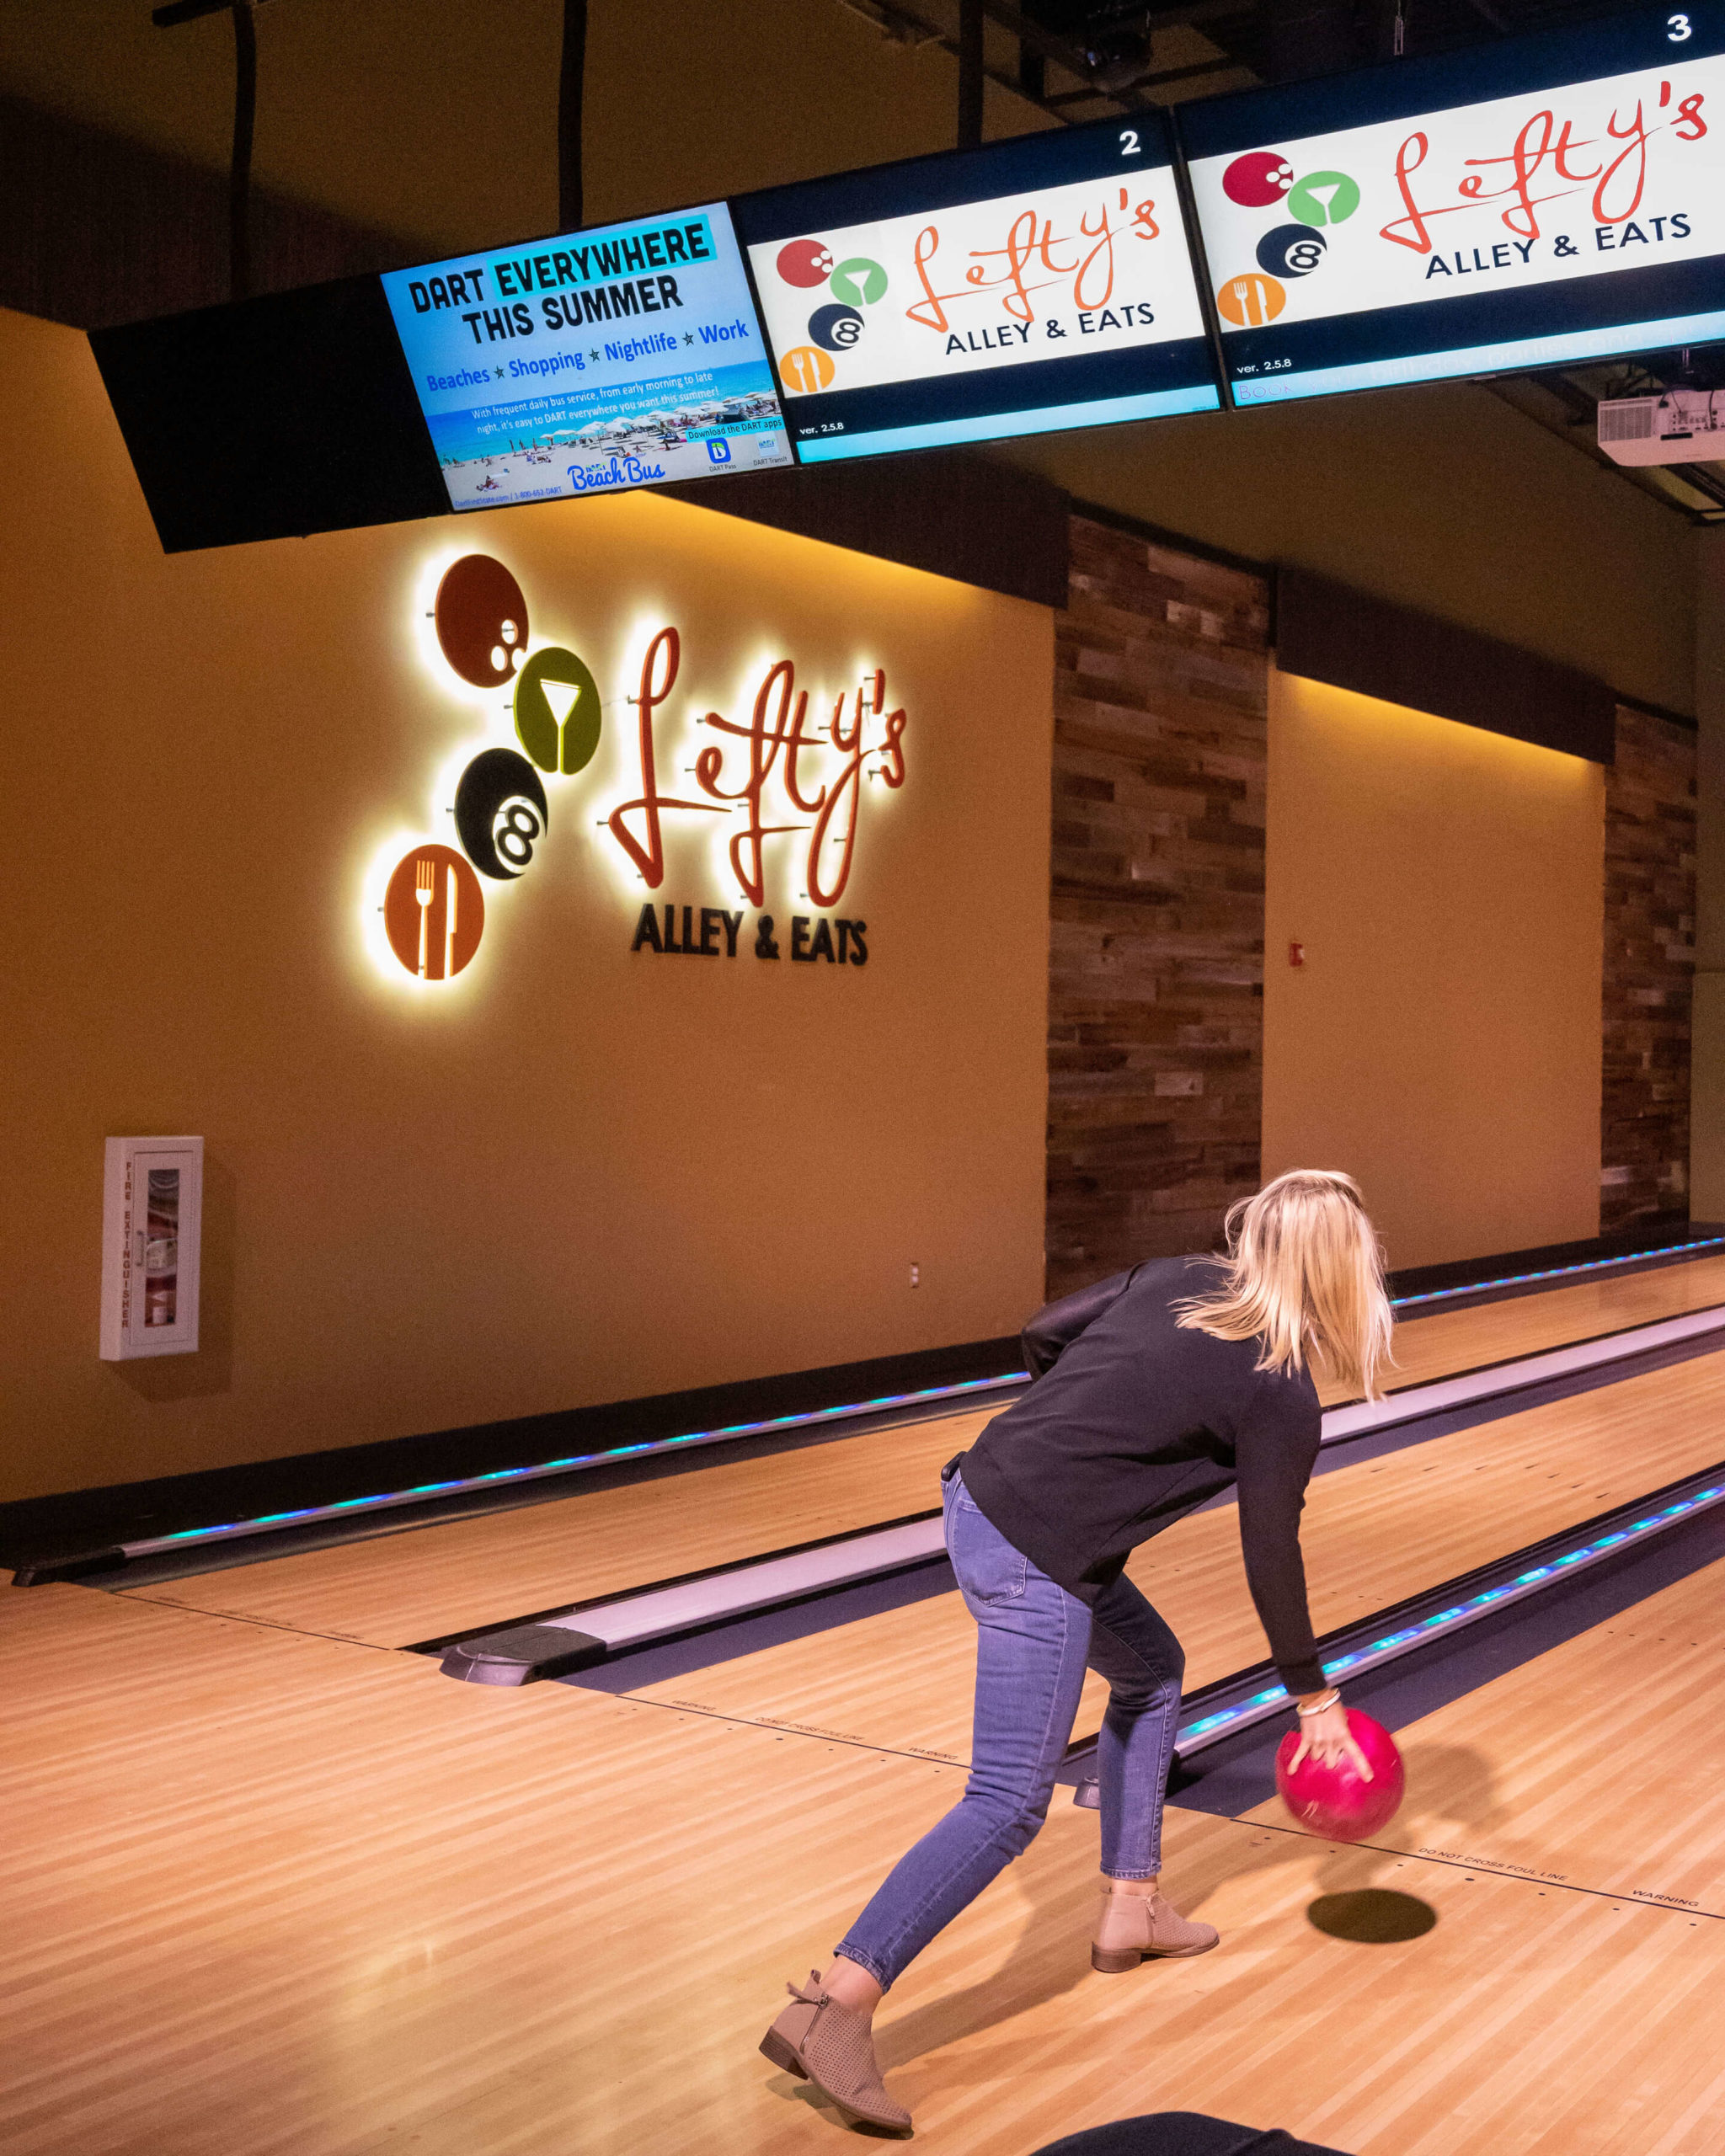 clip peach feasible Bowling Lanes & Attractions Lewes Delaware - Lefty's Alley & Eats